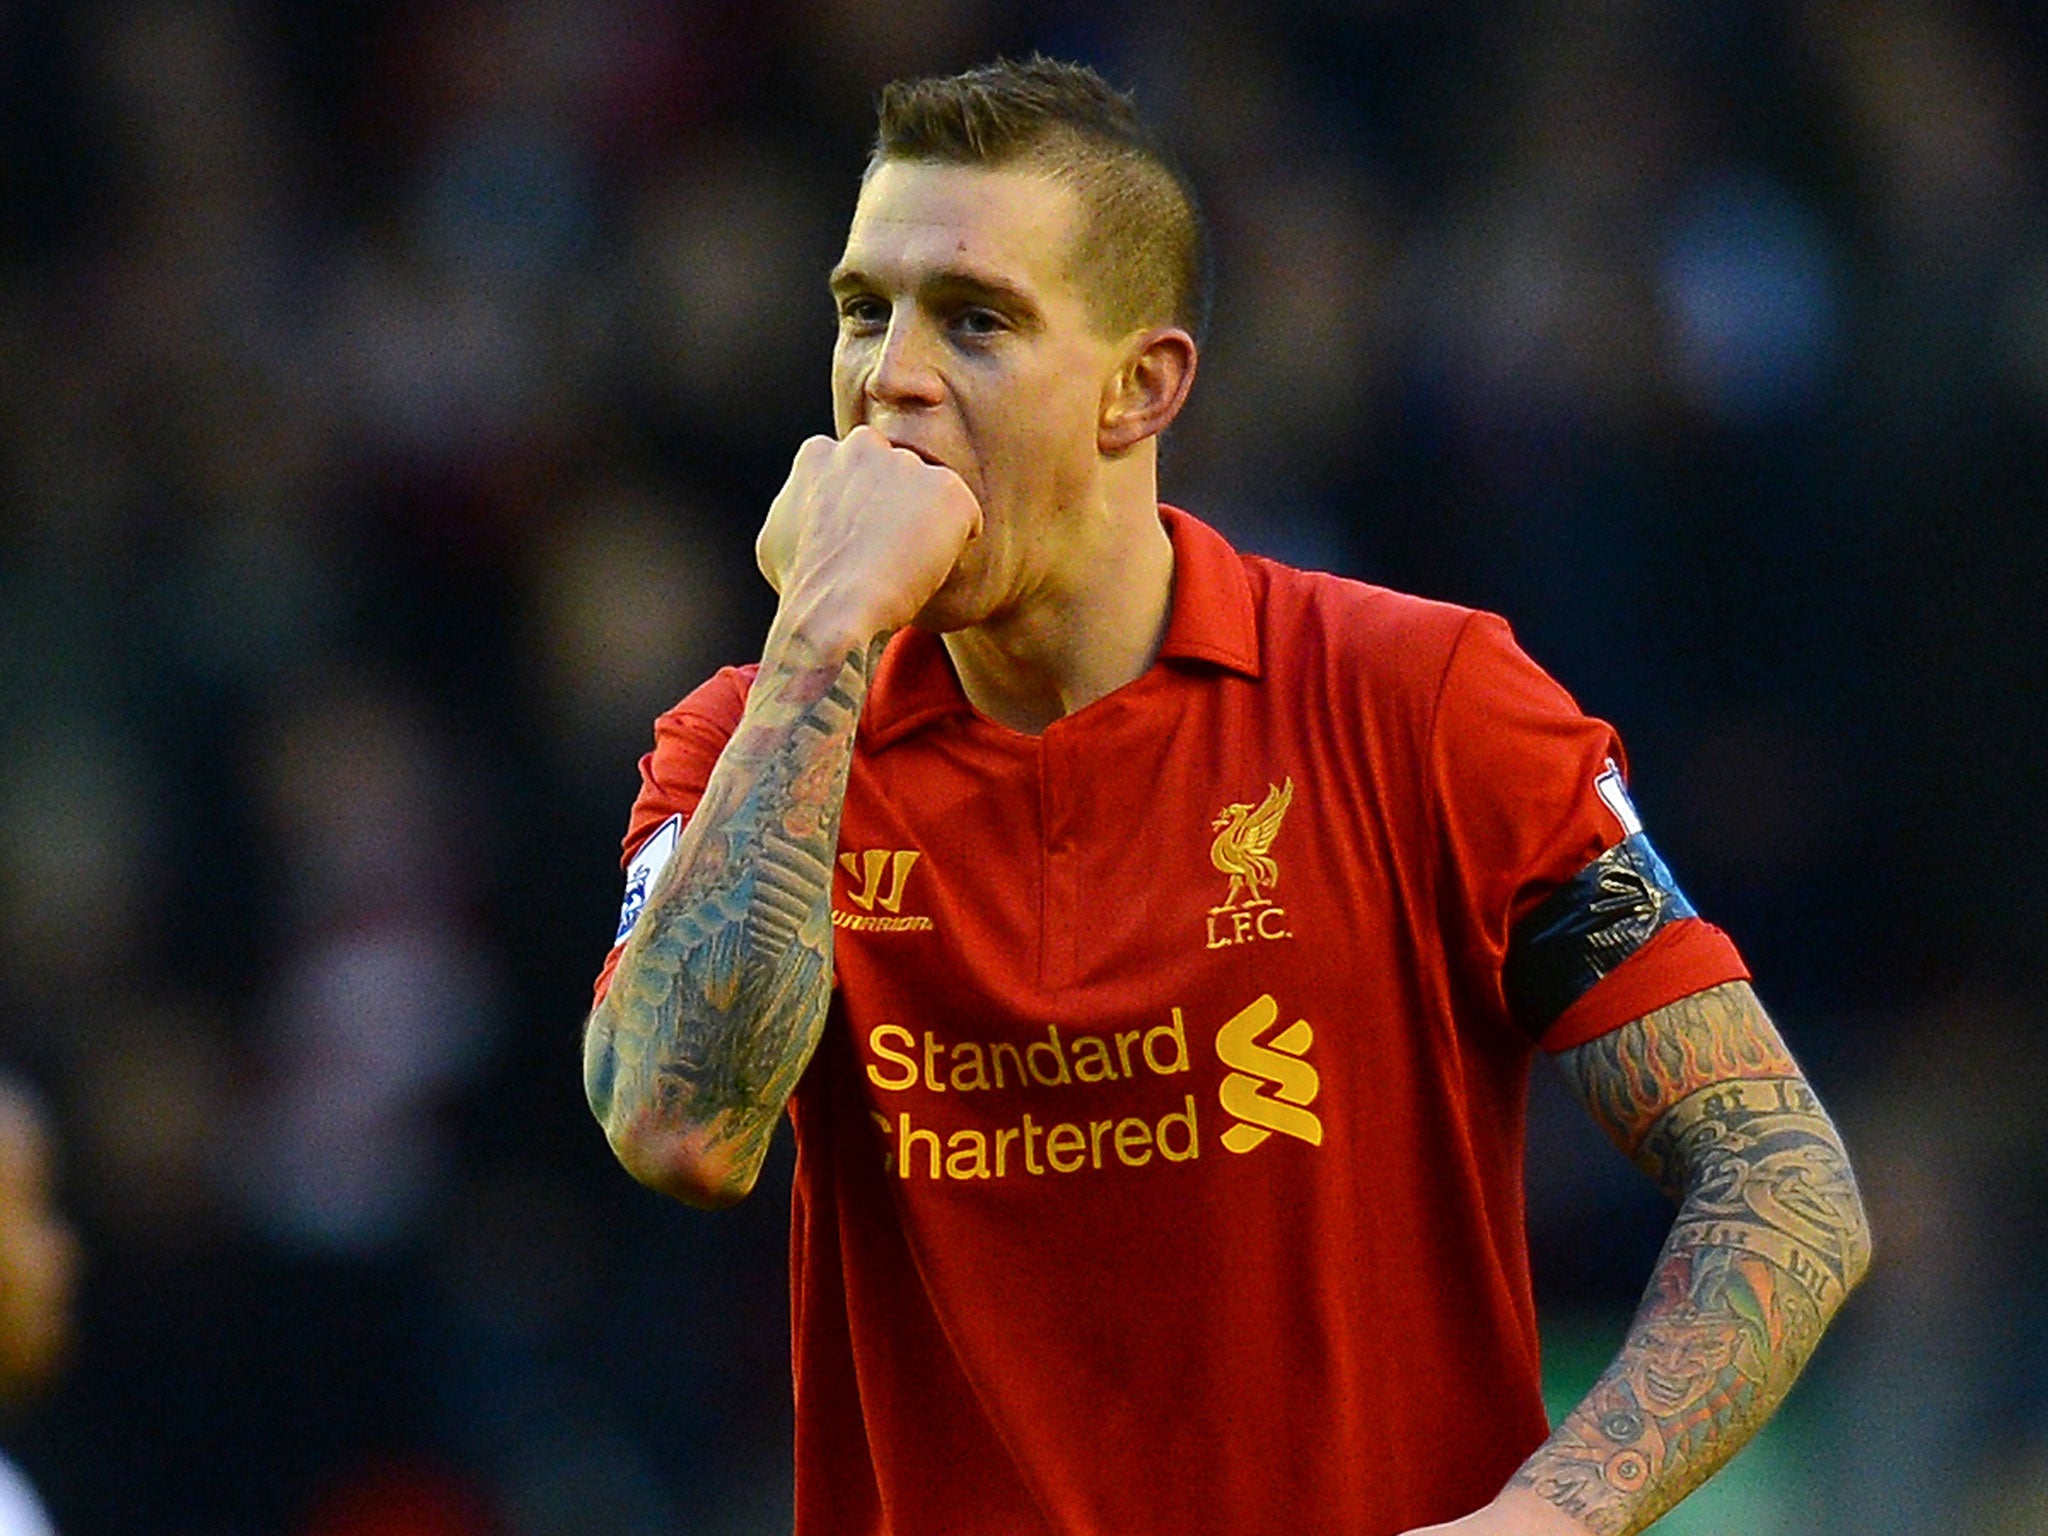 Daniel Agger is a reported target for Arsenal